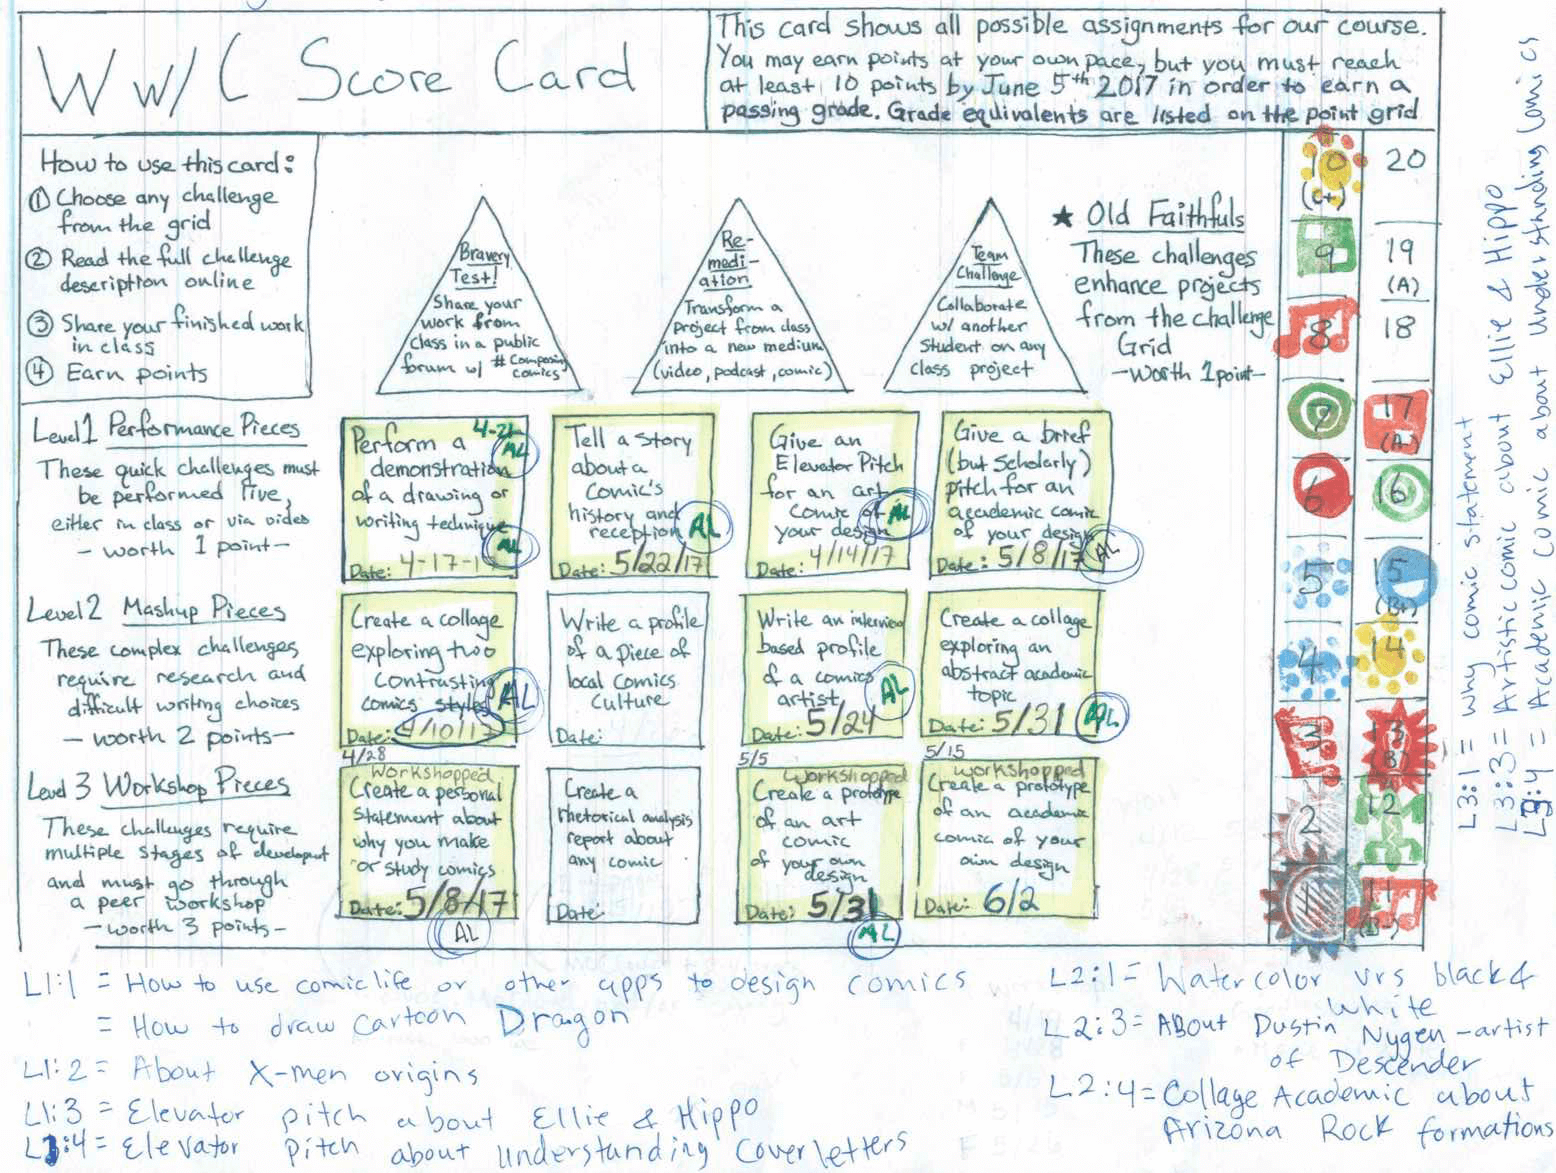 Figure 2. A hand-drawn version of the playable syllabus labeled as a “scorecard.” The student’s annotations detail how the student plans to earn points.